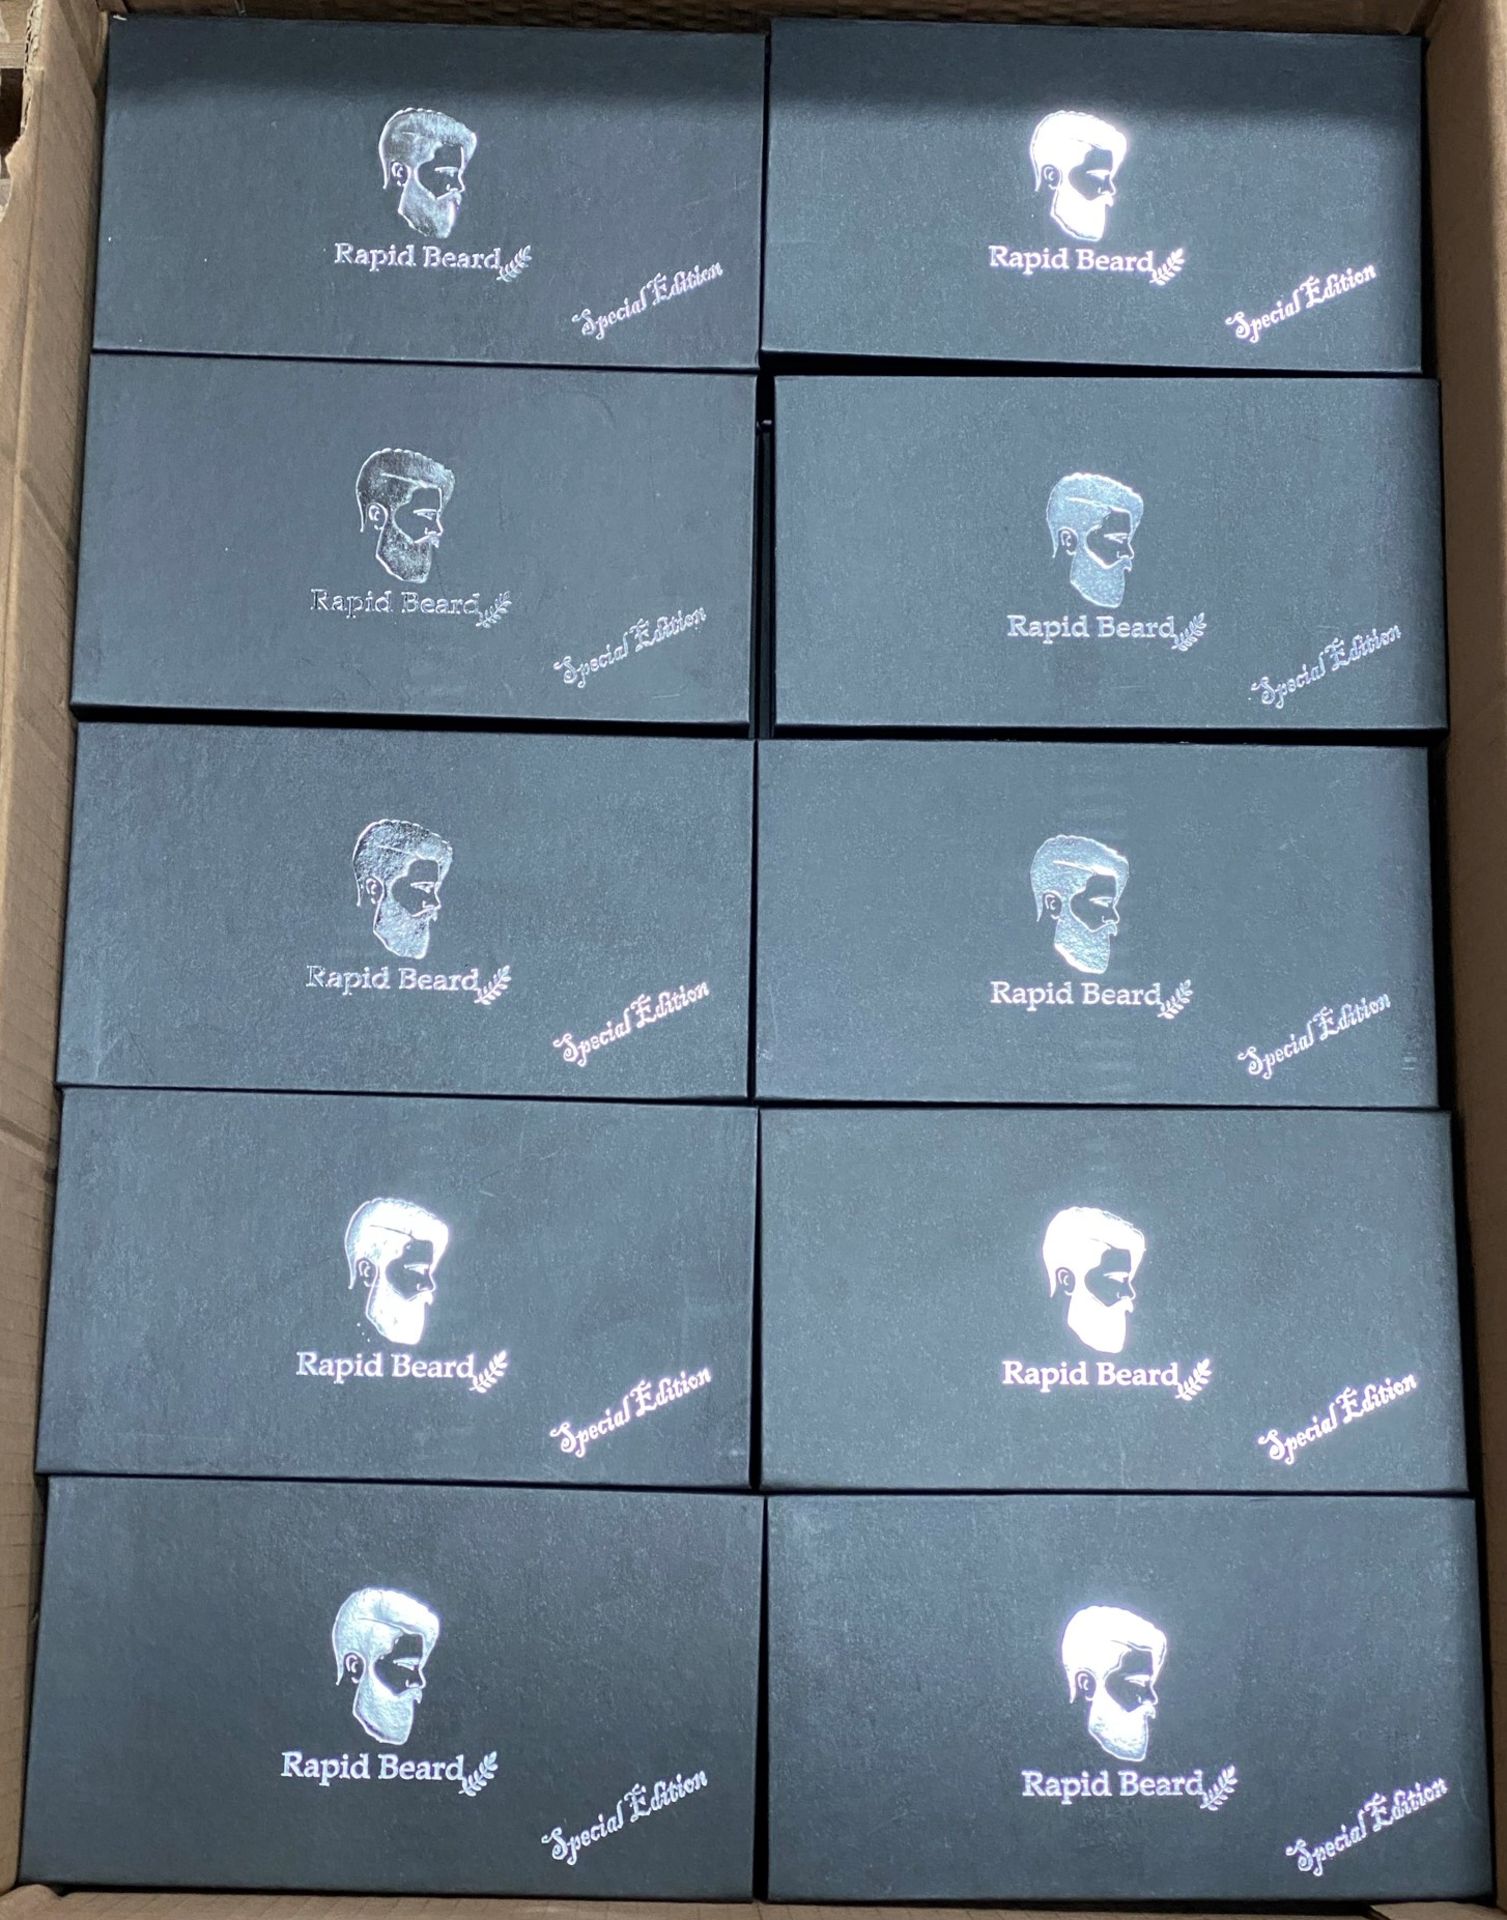 40 x Rapid Beard Special Edition box sets (1 outer box - 40 sets per box) - Image 2 of 3